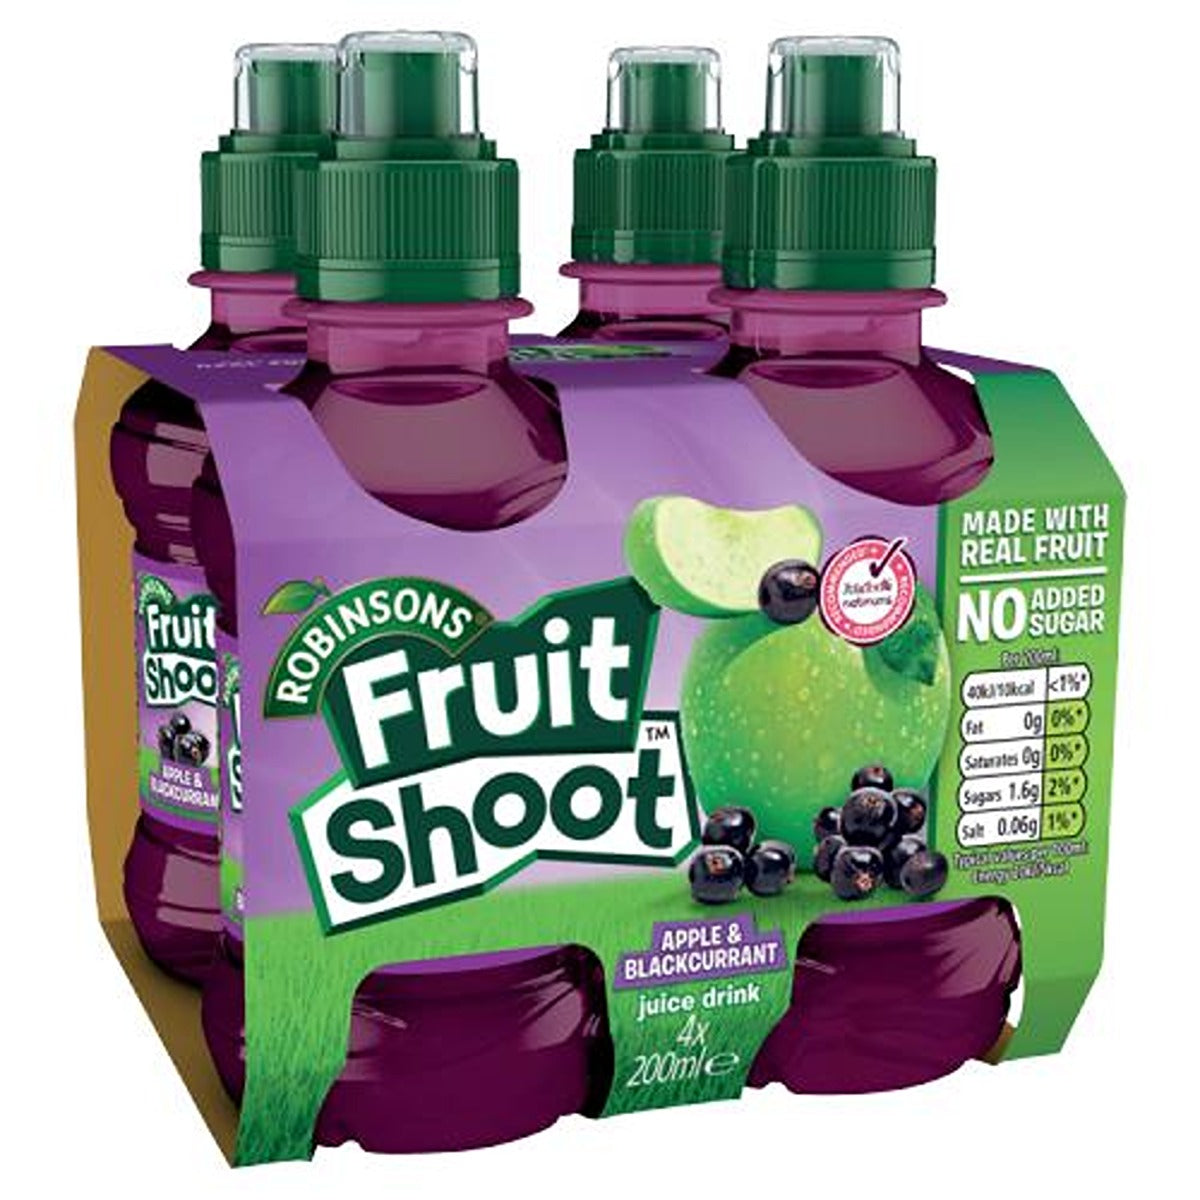 Robinsons - Fruit Shoot Apple & Blackcurrant Juice Drink - 4 x 200ml - Continental Food Store